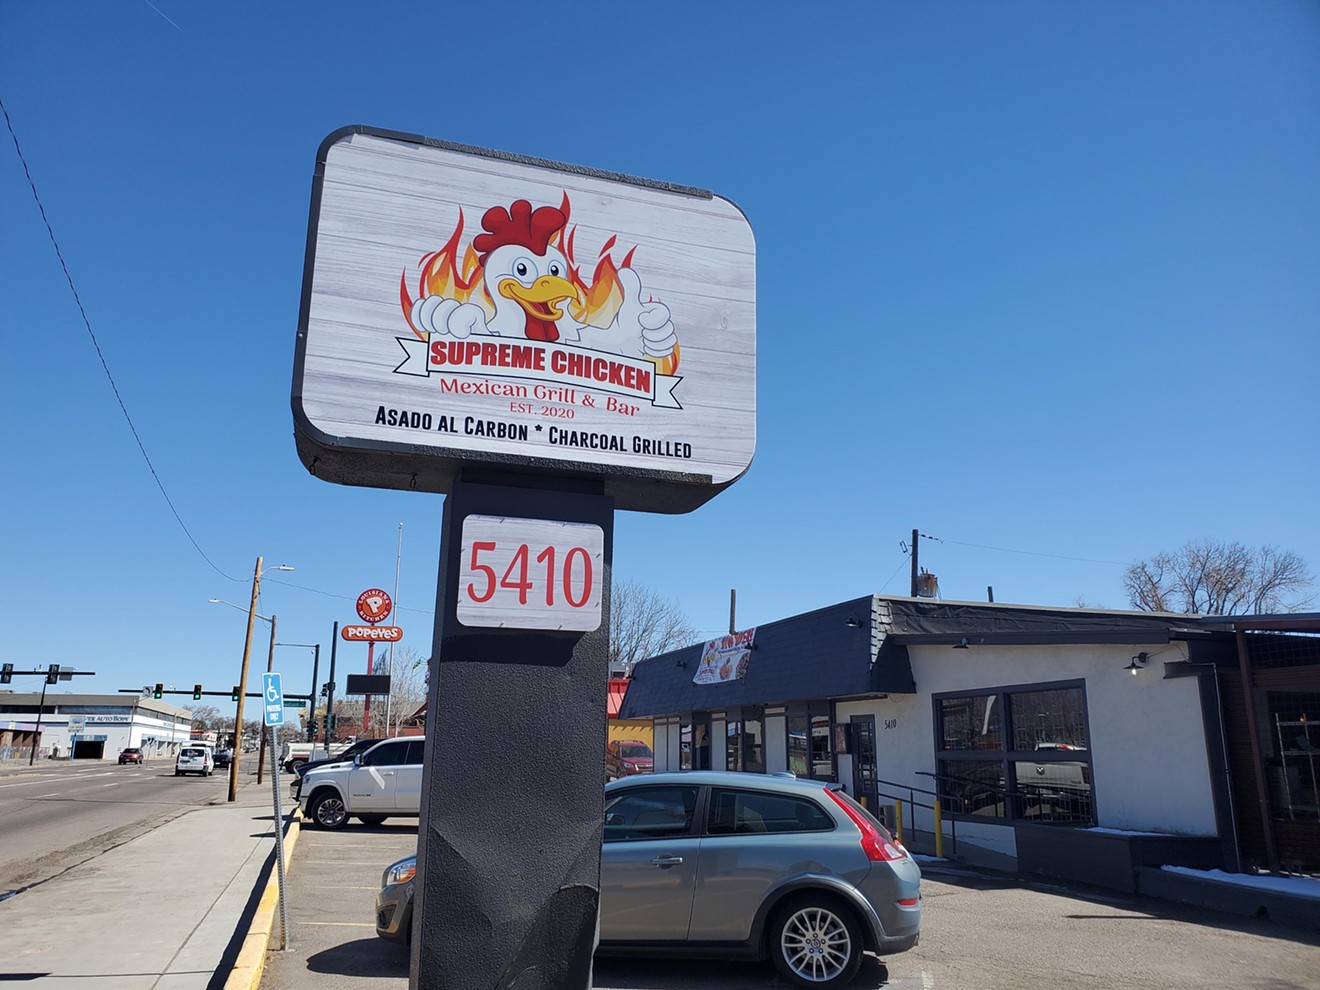 Supreme Chicken is the third concept in this East Colfax space since Solera closed.